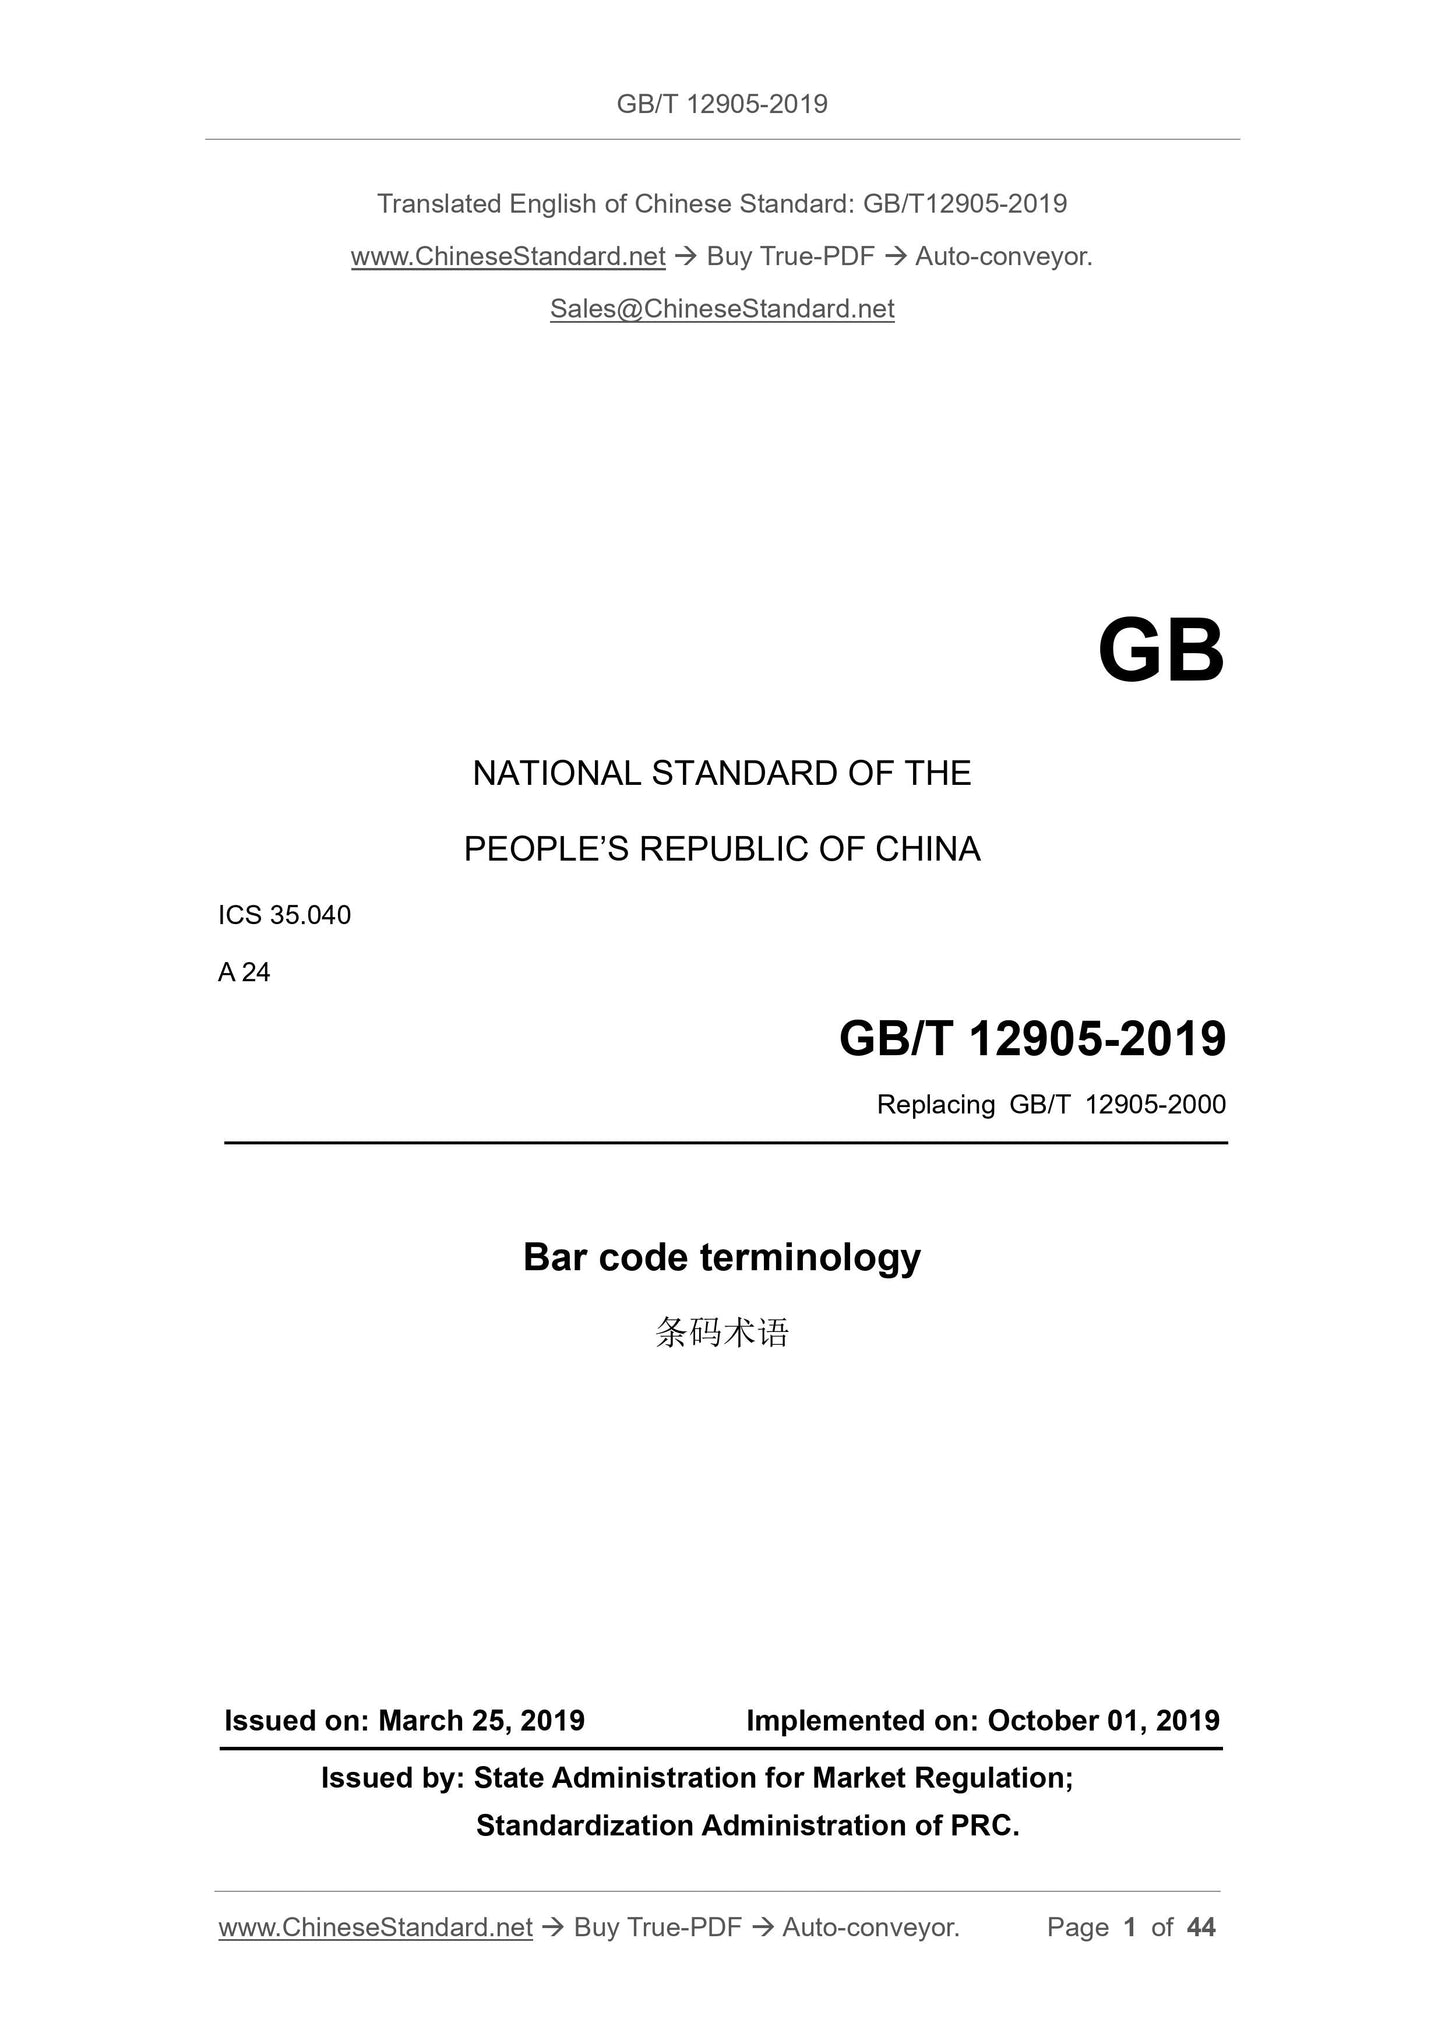 GB/T 12905-2019 Page 1